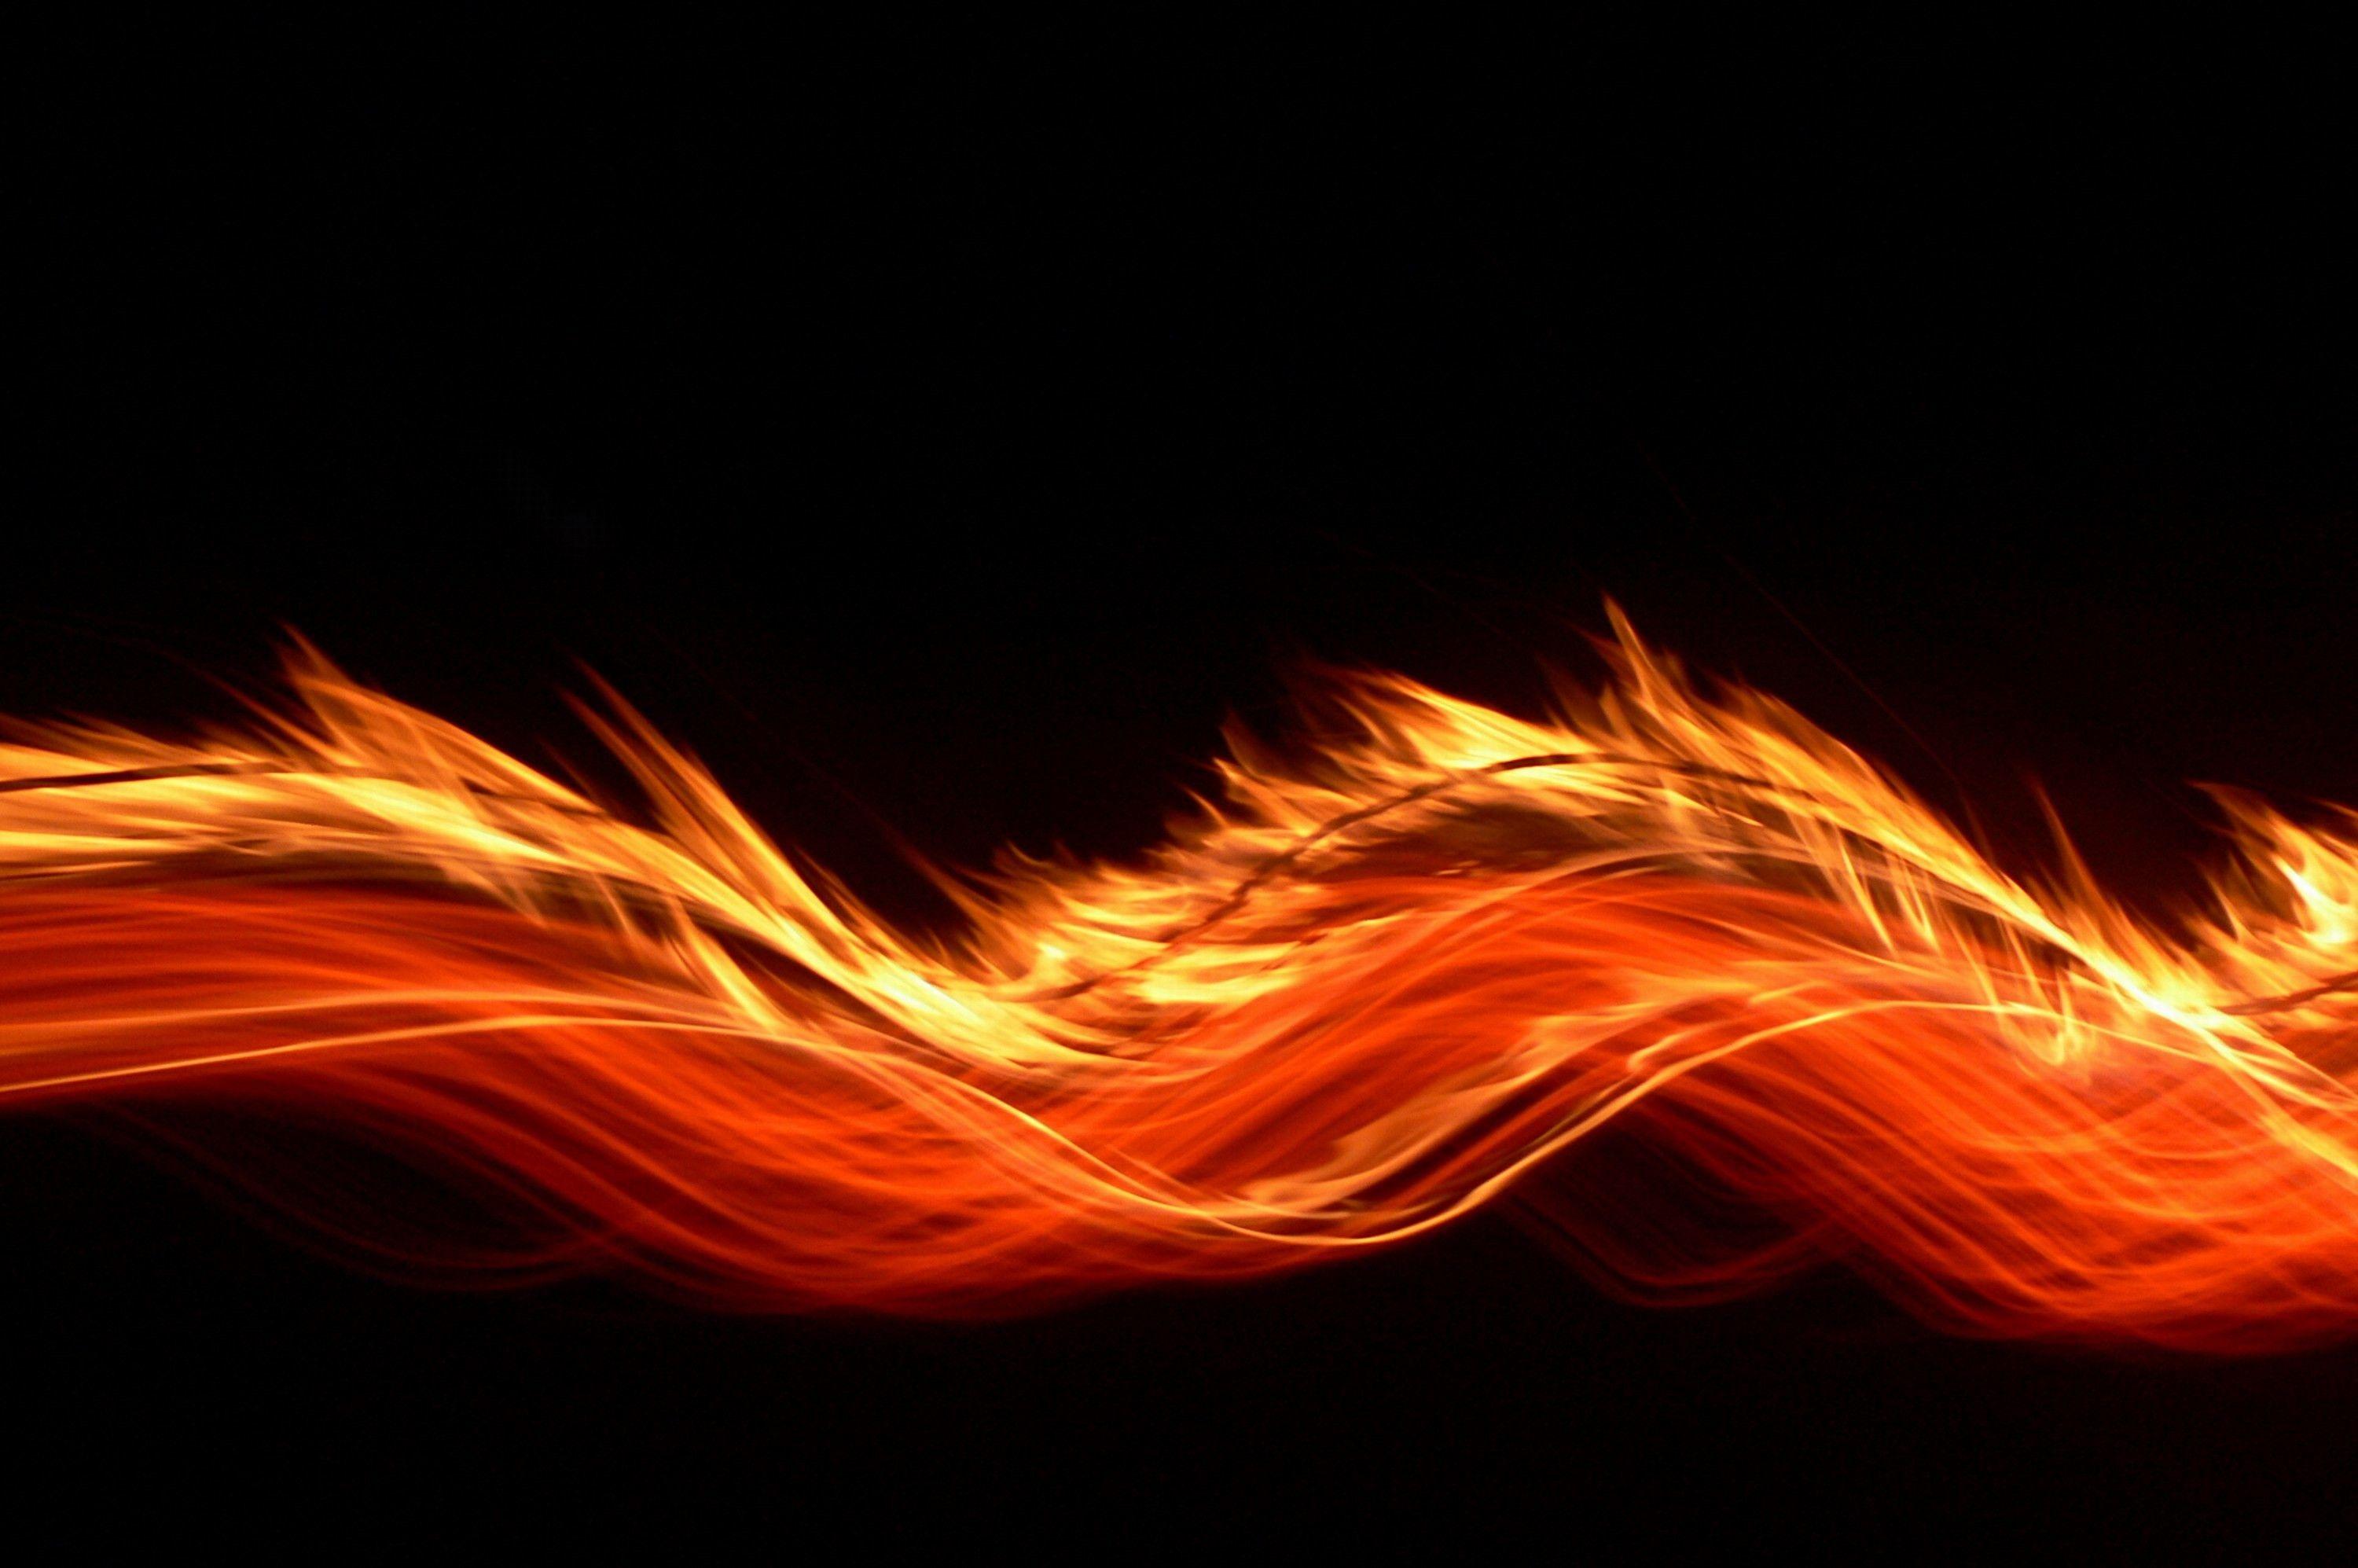 Aesthetic Fire Wallpapers - Top Free Aesthetic Fire Backgrounds